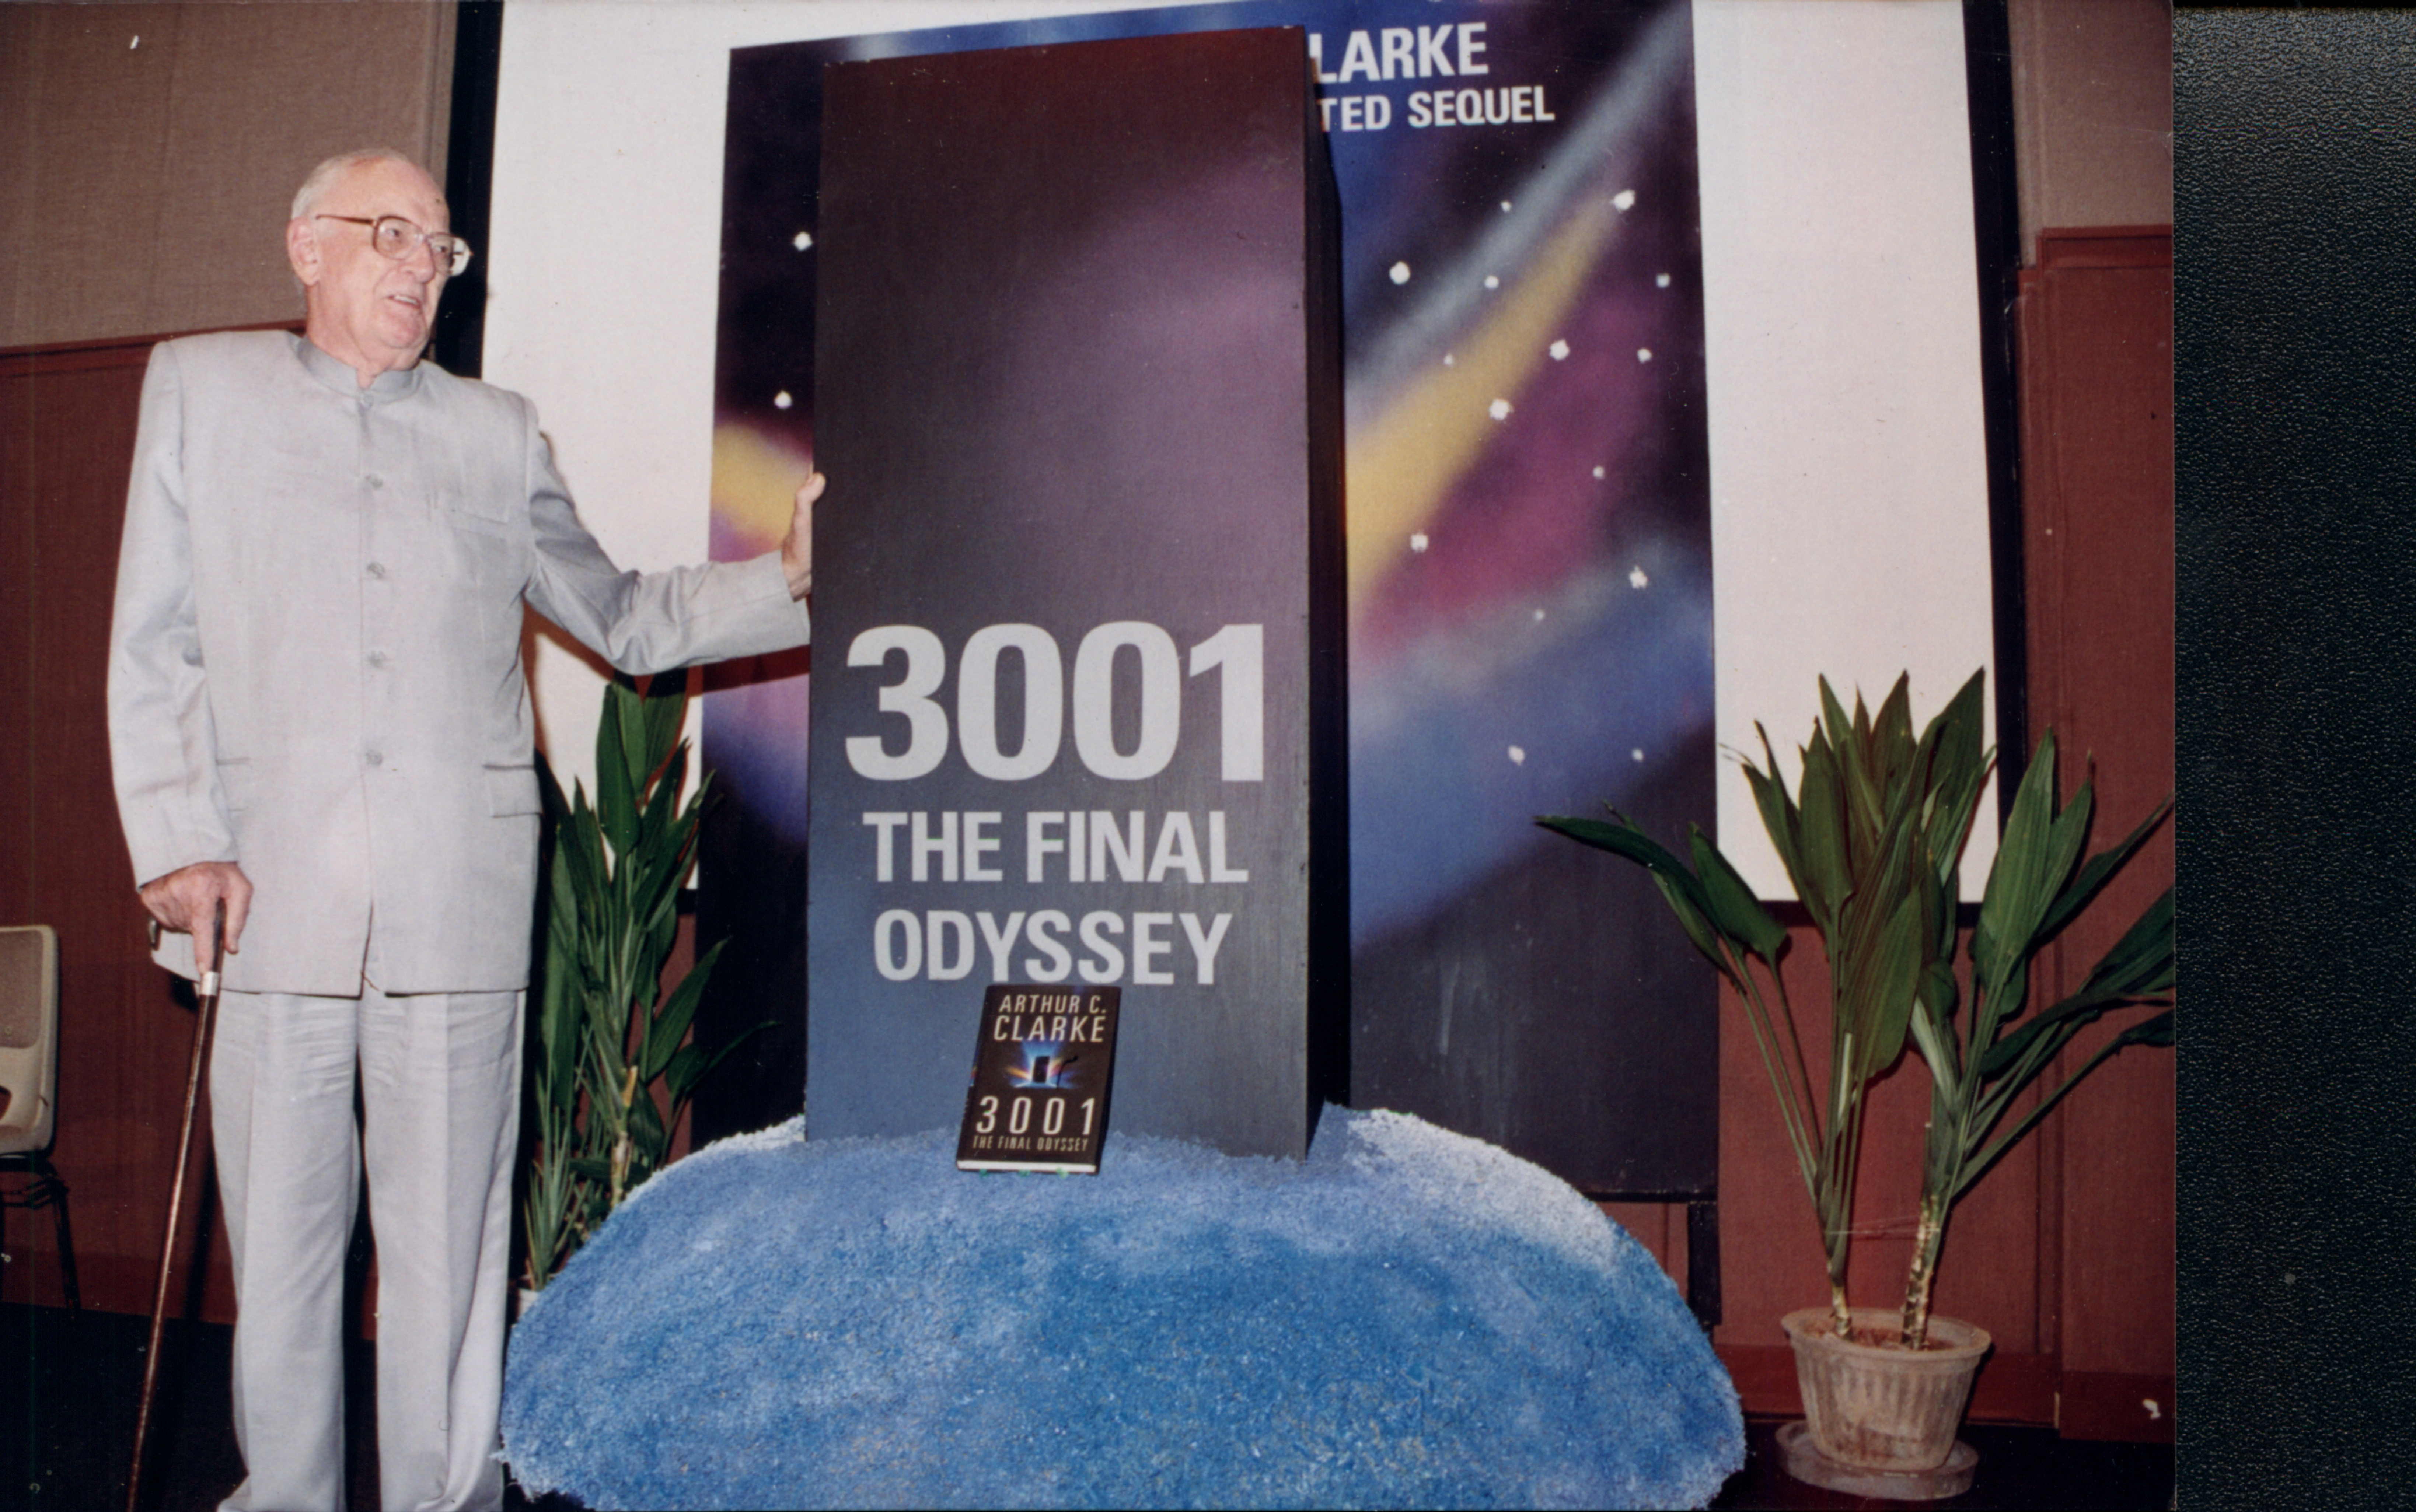 Arthur C Clarke at the launch of his 1997 novel, 3001 The Final Odyssey at British Council, Colombo